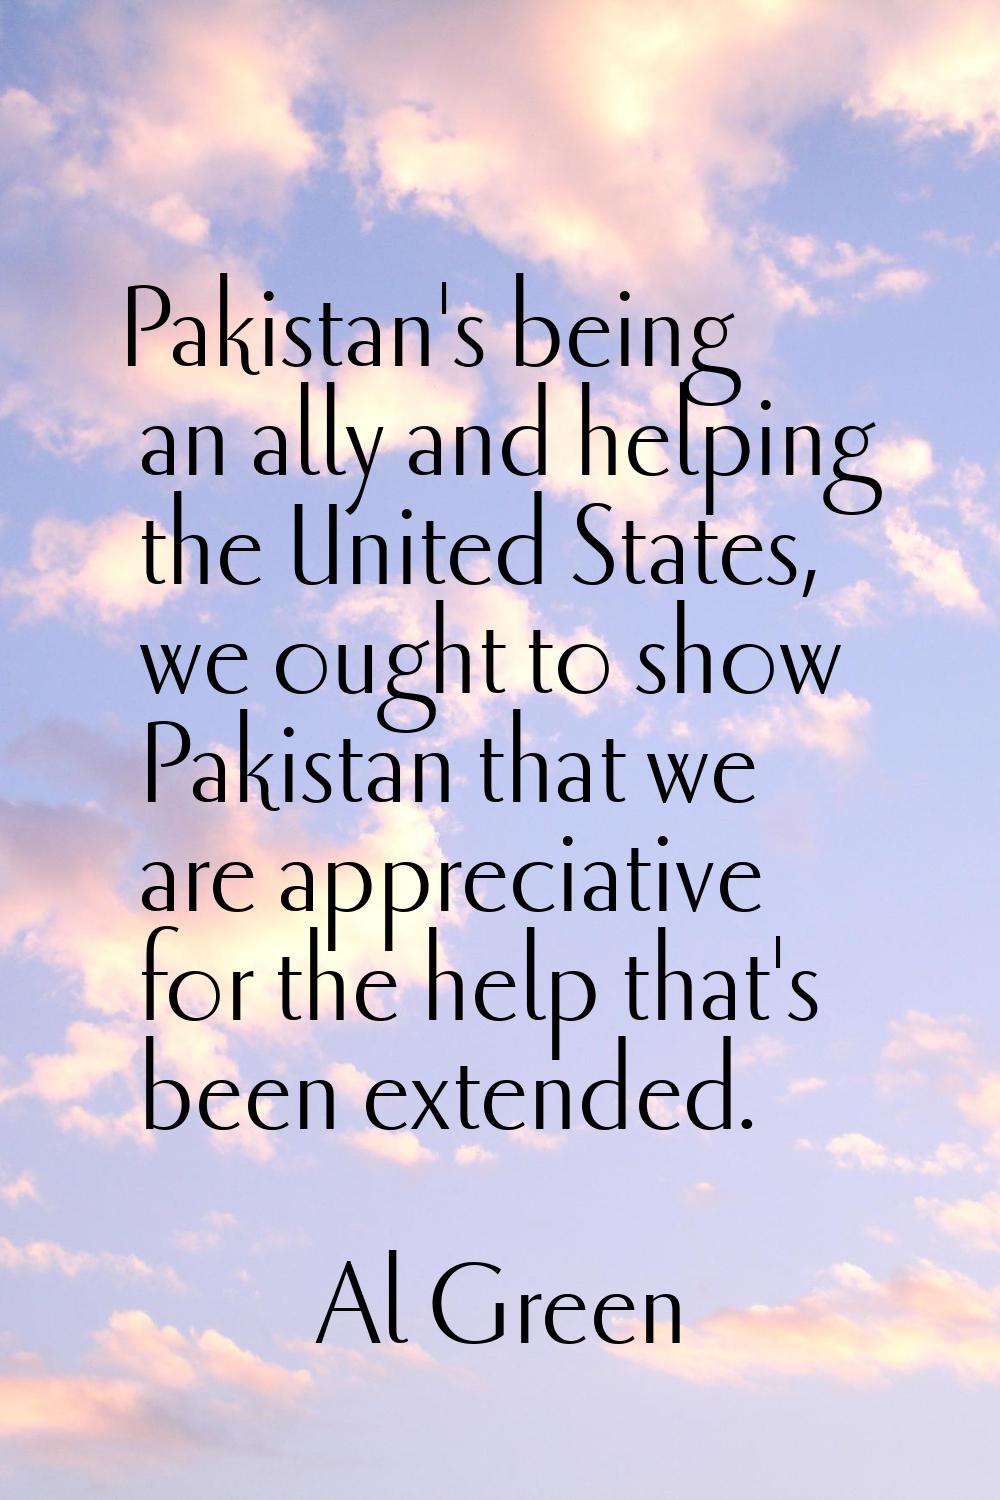 Pakistan's being an ally and helping the United States, we ought to show Pakistan that we are appre